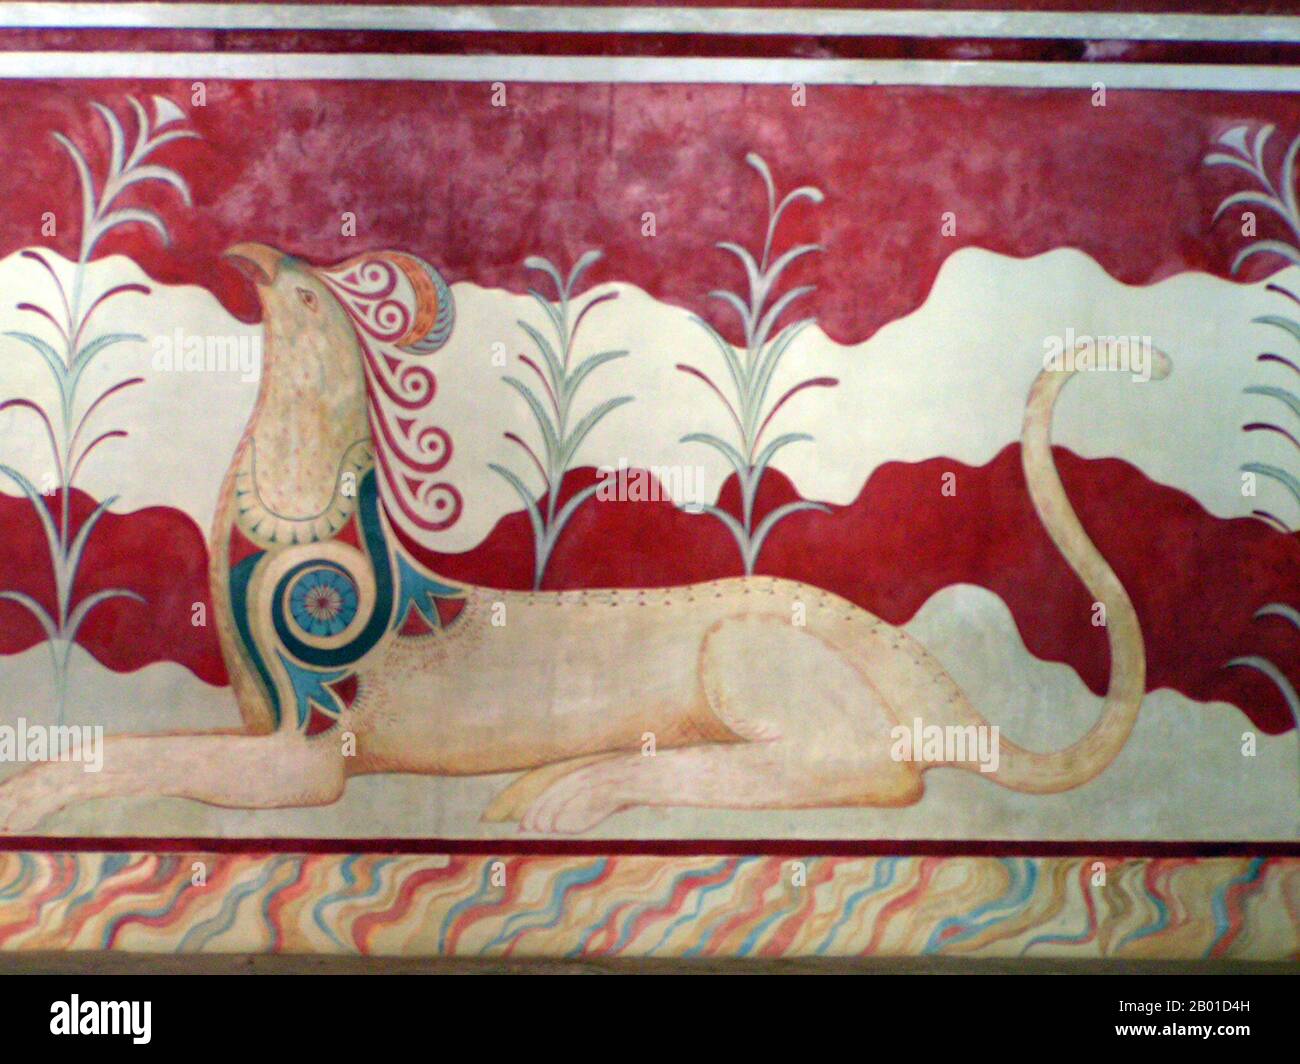 Greece: Fresco of a griffin in the throne room, Knossos, Crete, c. 1600-1450 BCE. Photo by Paginazero (CC BY-SA 3.0 License).  Knossos (alternative spellings Knossus, Cnossus, Greek Κνωσός), also known as Labyrinth, or Knossos Palace, is the largest Bronze Age archaeological site on Crete and probably the ceremonial and political centre of the Minoan civilisation and culture. The palace appears as a maze of workrooms, living spaces, and store rooms close to a central square.  Detailed images of Cretan life in the late Bronze Age are provided by images on the walls of this palace. Stock Photo